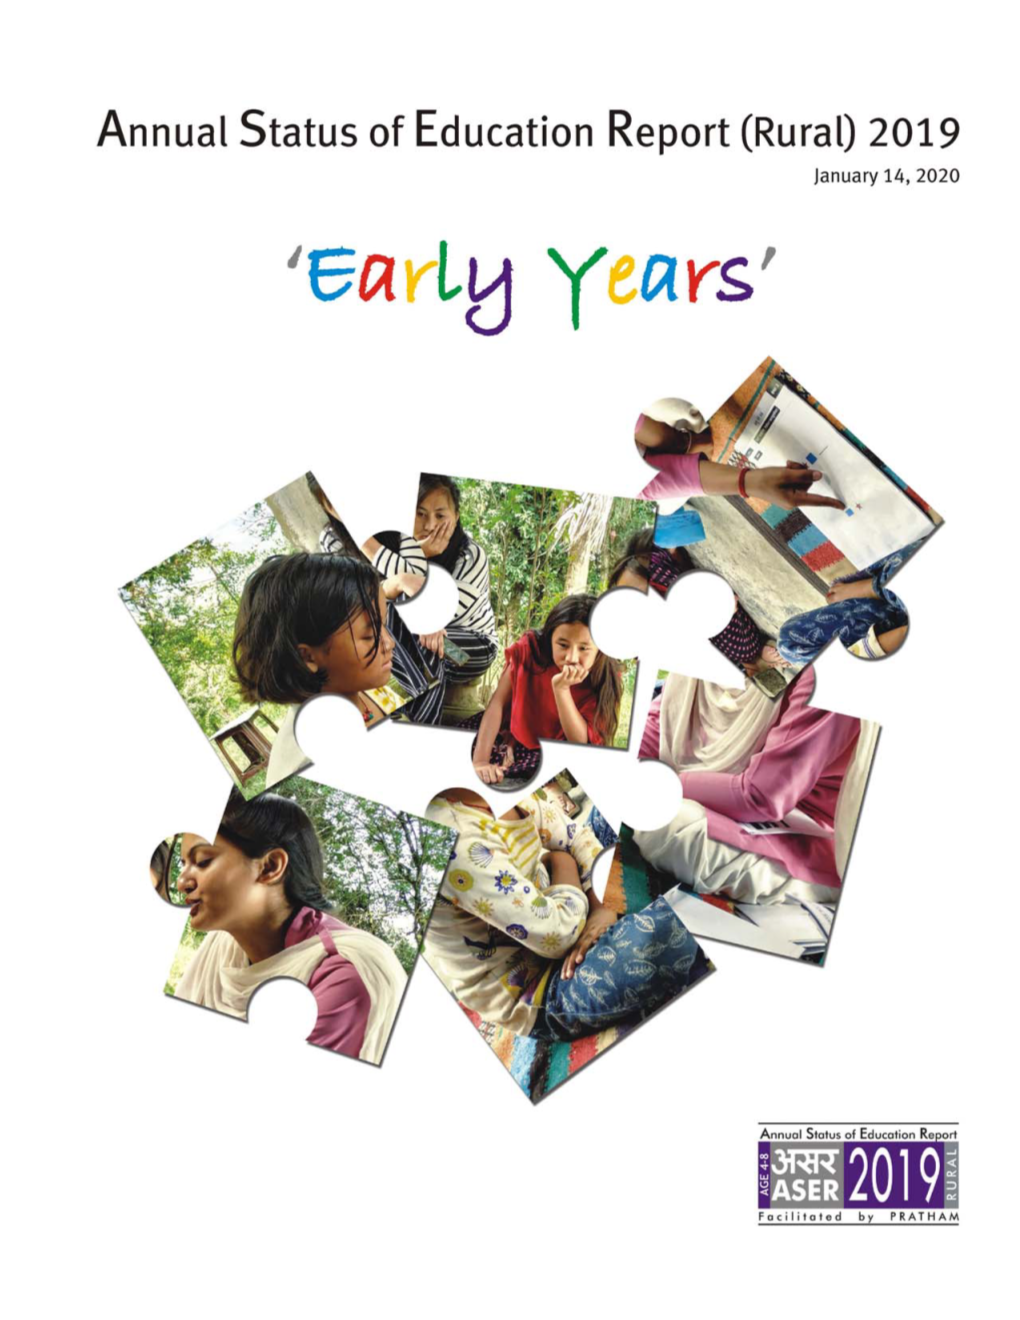 Annual Status of Education Report (Rural) 2019 'Early Years' ASER 2019 'Early Years' – Partners